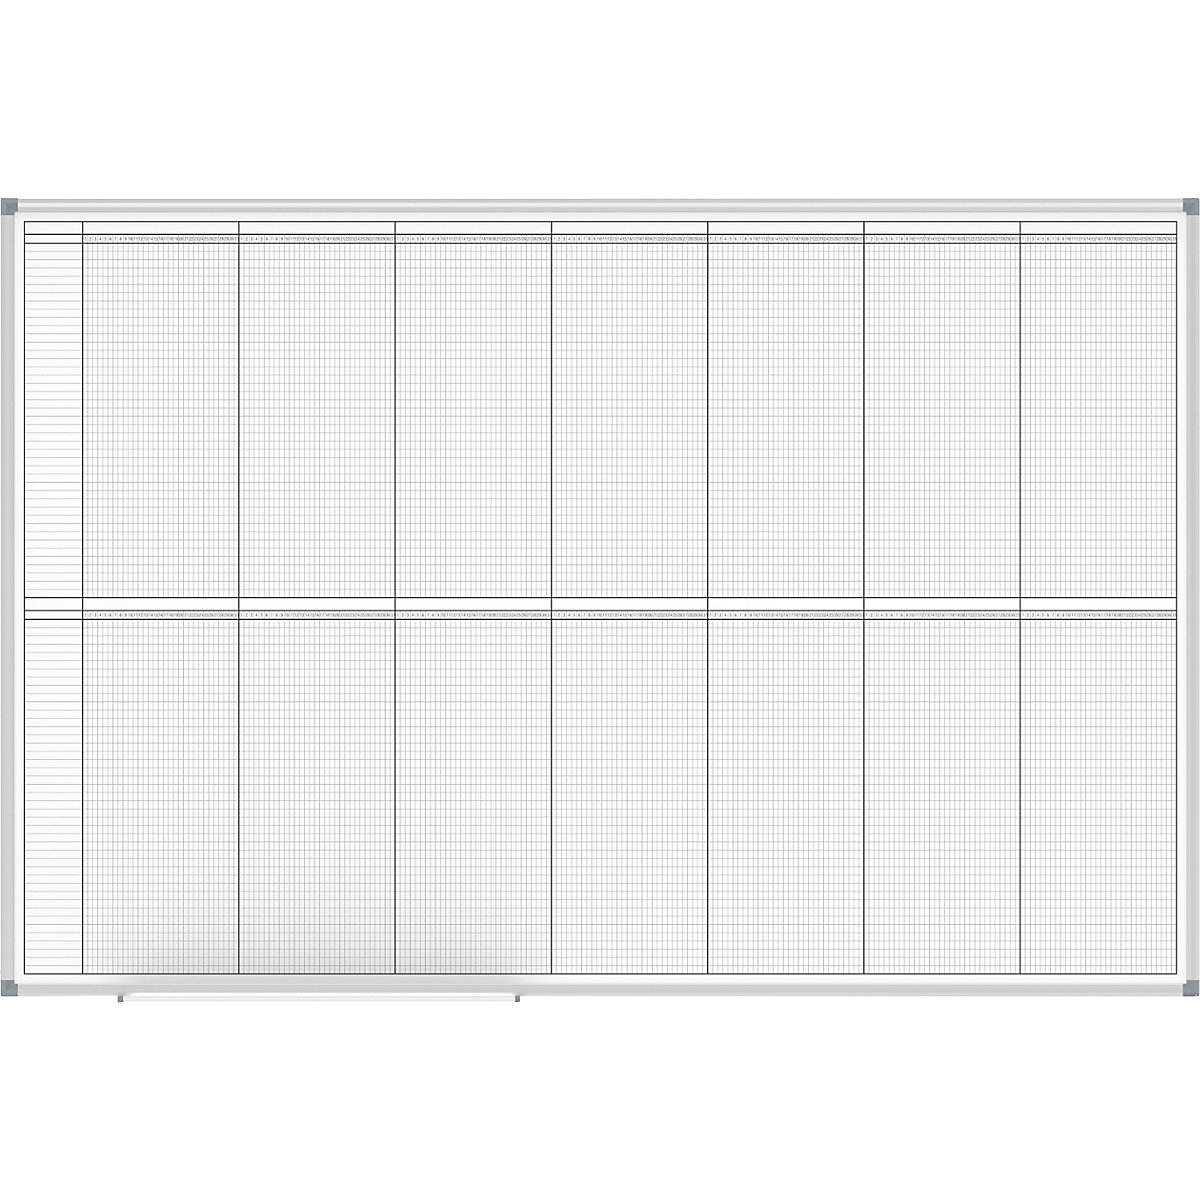 Planning board – MAUL, yearly planner, 2 x 6 month view, width 1500 mm-3